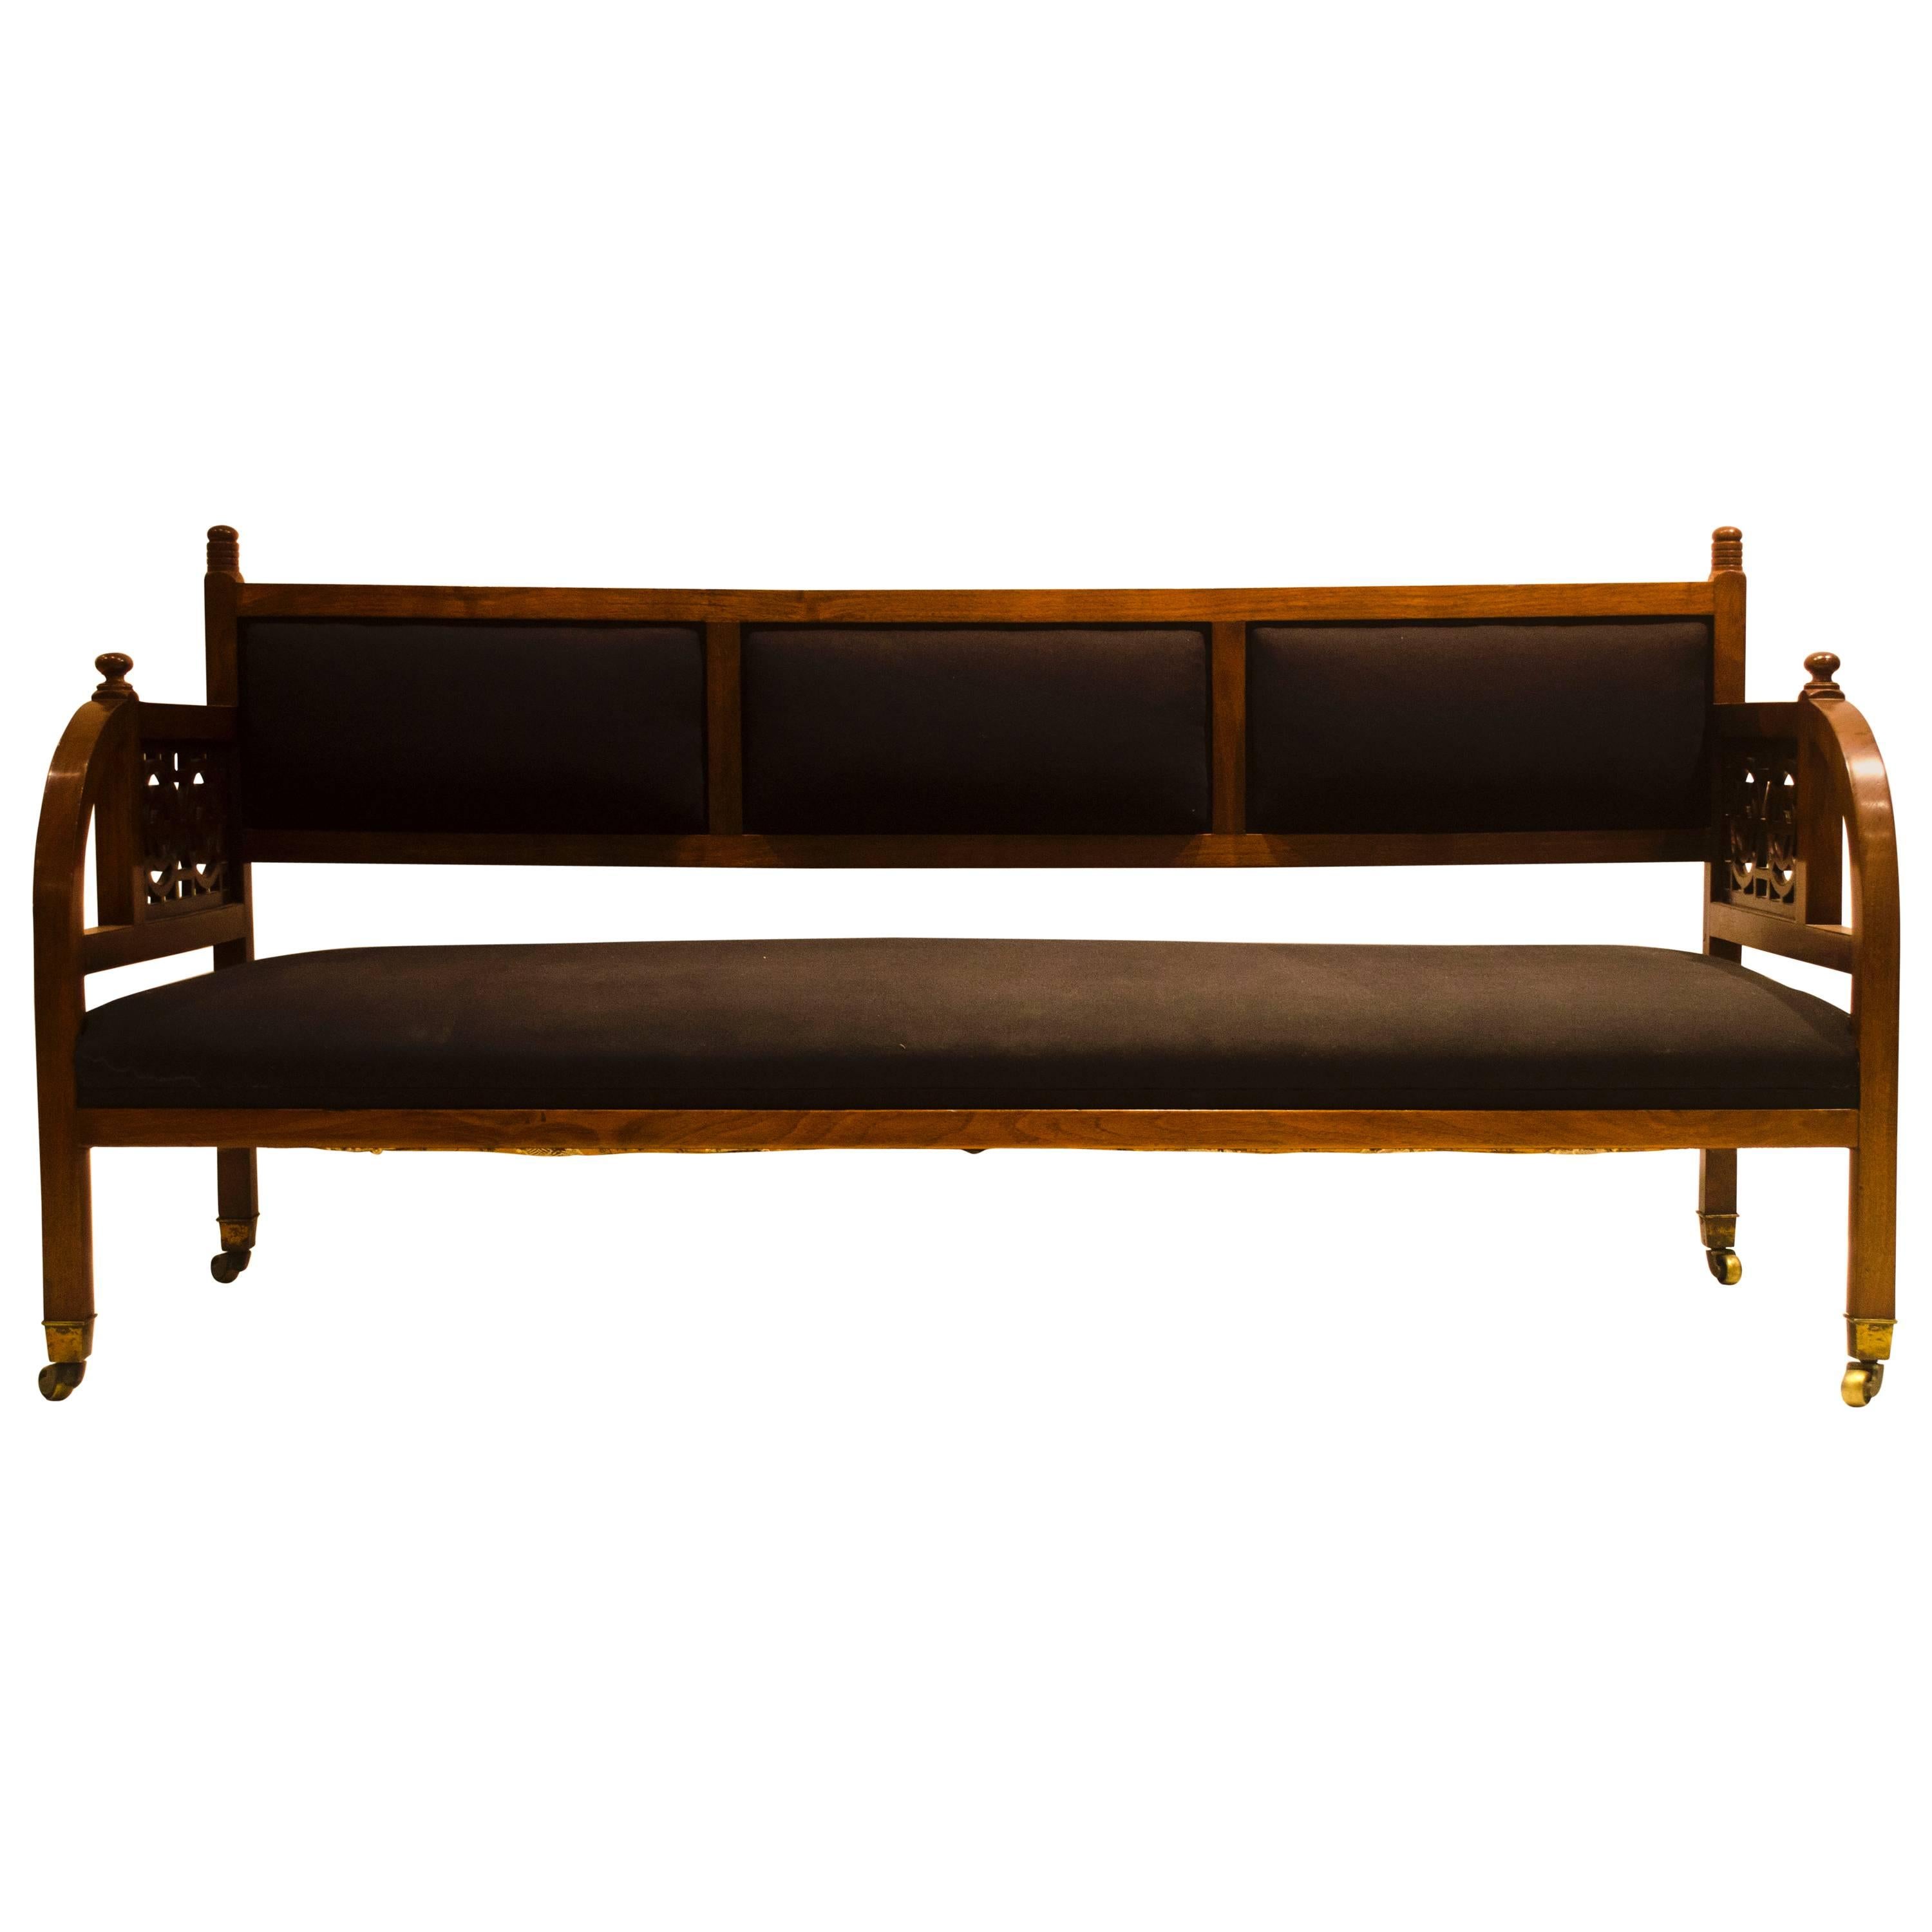 Anglo-Japanese Mahogany Settee by E.W. Godwin and probably made by William Watt